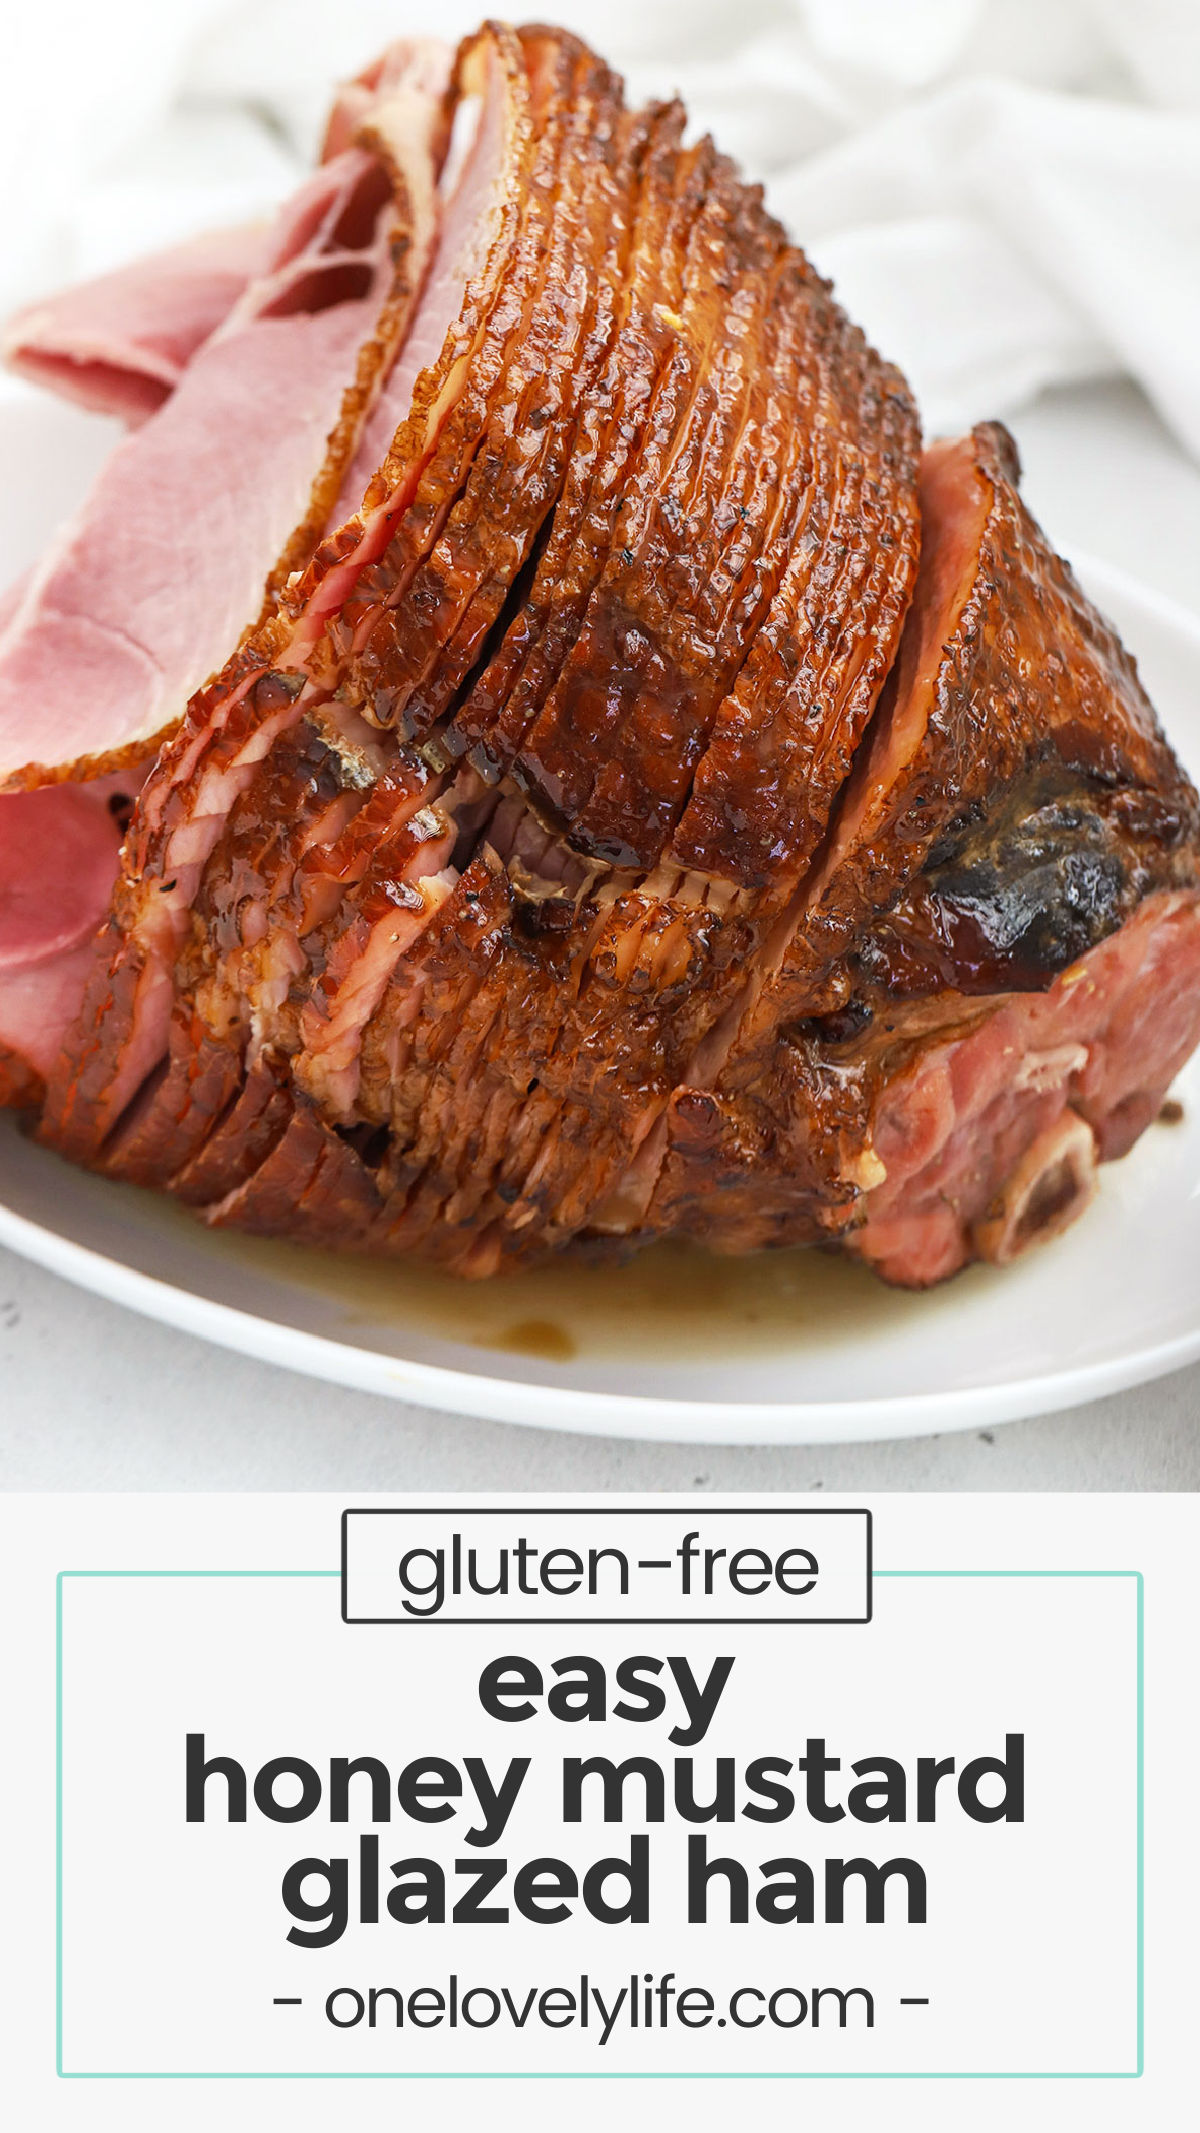 Spiral Ham With Honey Mustard Ham Glaze - This easy ham glaze recipe is made with honey, Dijon mustard, and brown sugar. It's sweet, tangy, and delicious! / honey mustard glazed ham / gluten-free ham glaze / gluten free glazed ham / gluten free glaze for ham / gluten-free easter recipe / gluten free thanksgiving recipe / gluten-free ham recipe / honey brown sugar ham glaze / the best glazed ham / ham glaze without spices / ham glaze no spices / ham glaze with mustard / ham glaze with honey